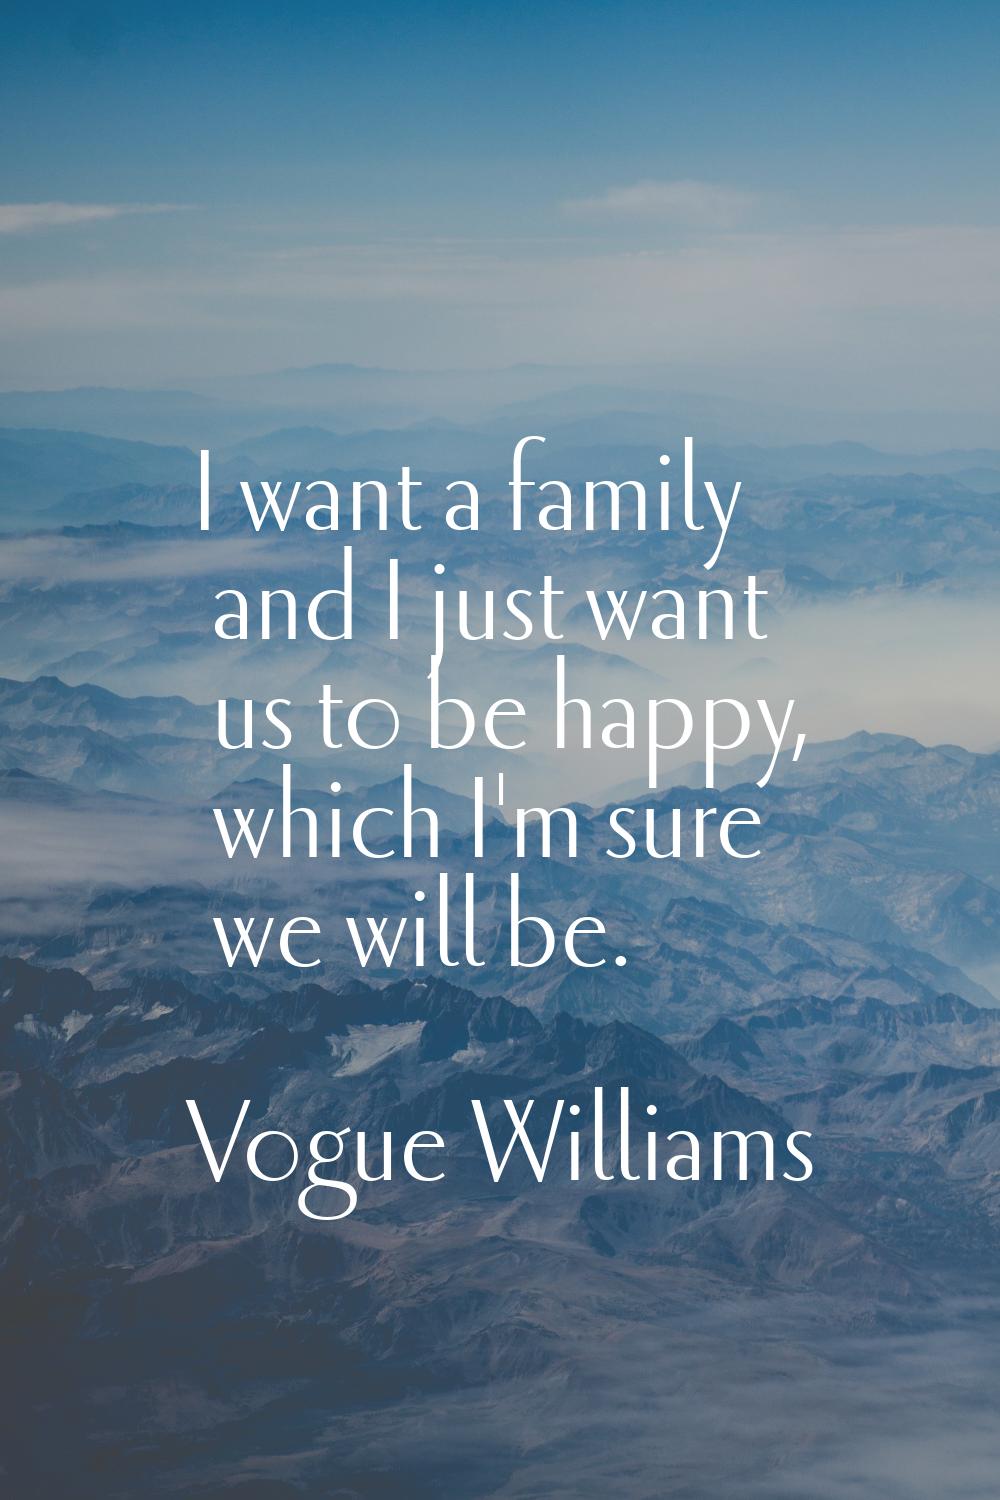 I want a family and I just want us to be happy, which I'm sure we will be.